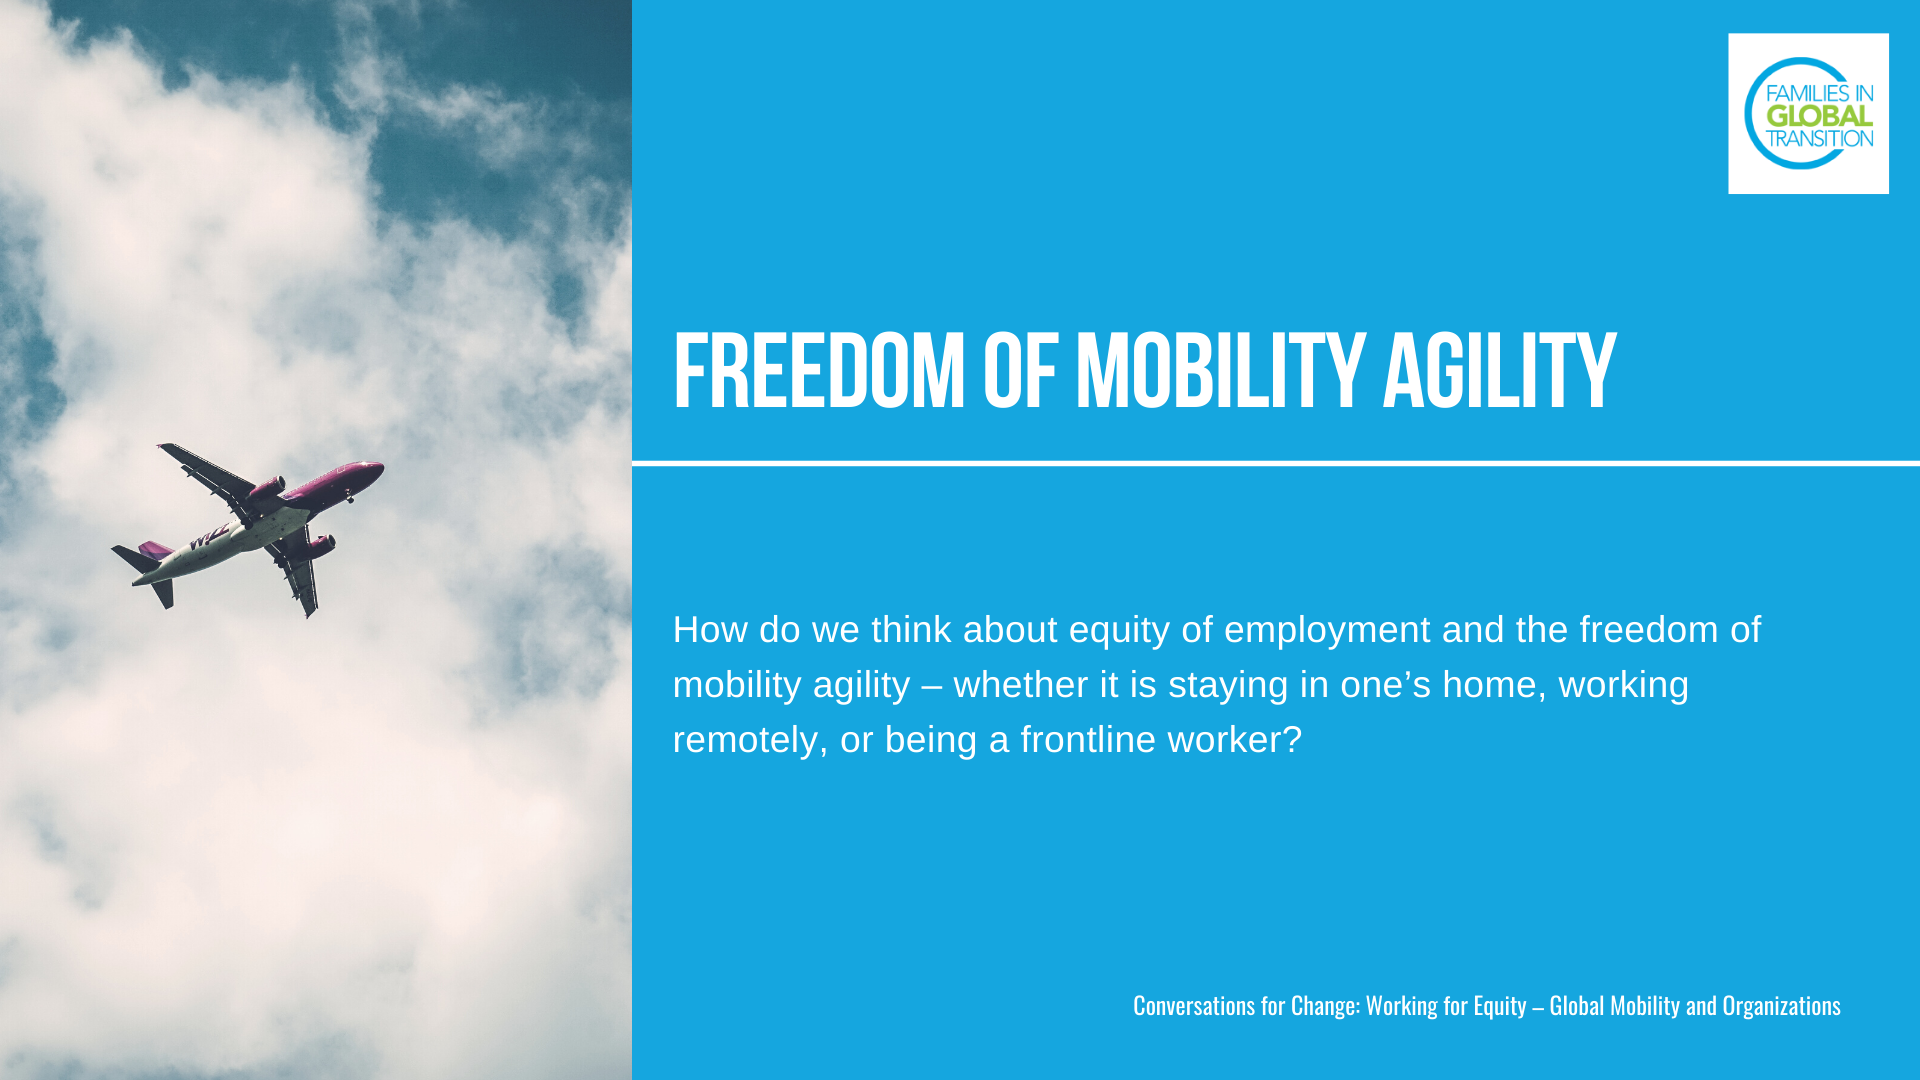 Freedom of mobility agility: How do we think about equity of employment and the freedom of mobility agility – whether it is staying in one’s home, working remotely, or being a frontline worker?